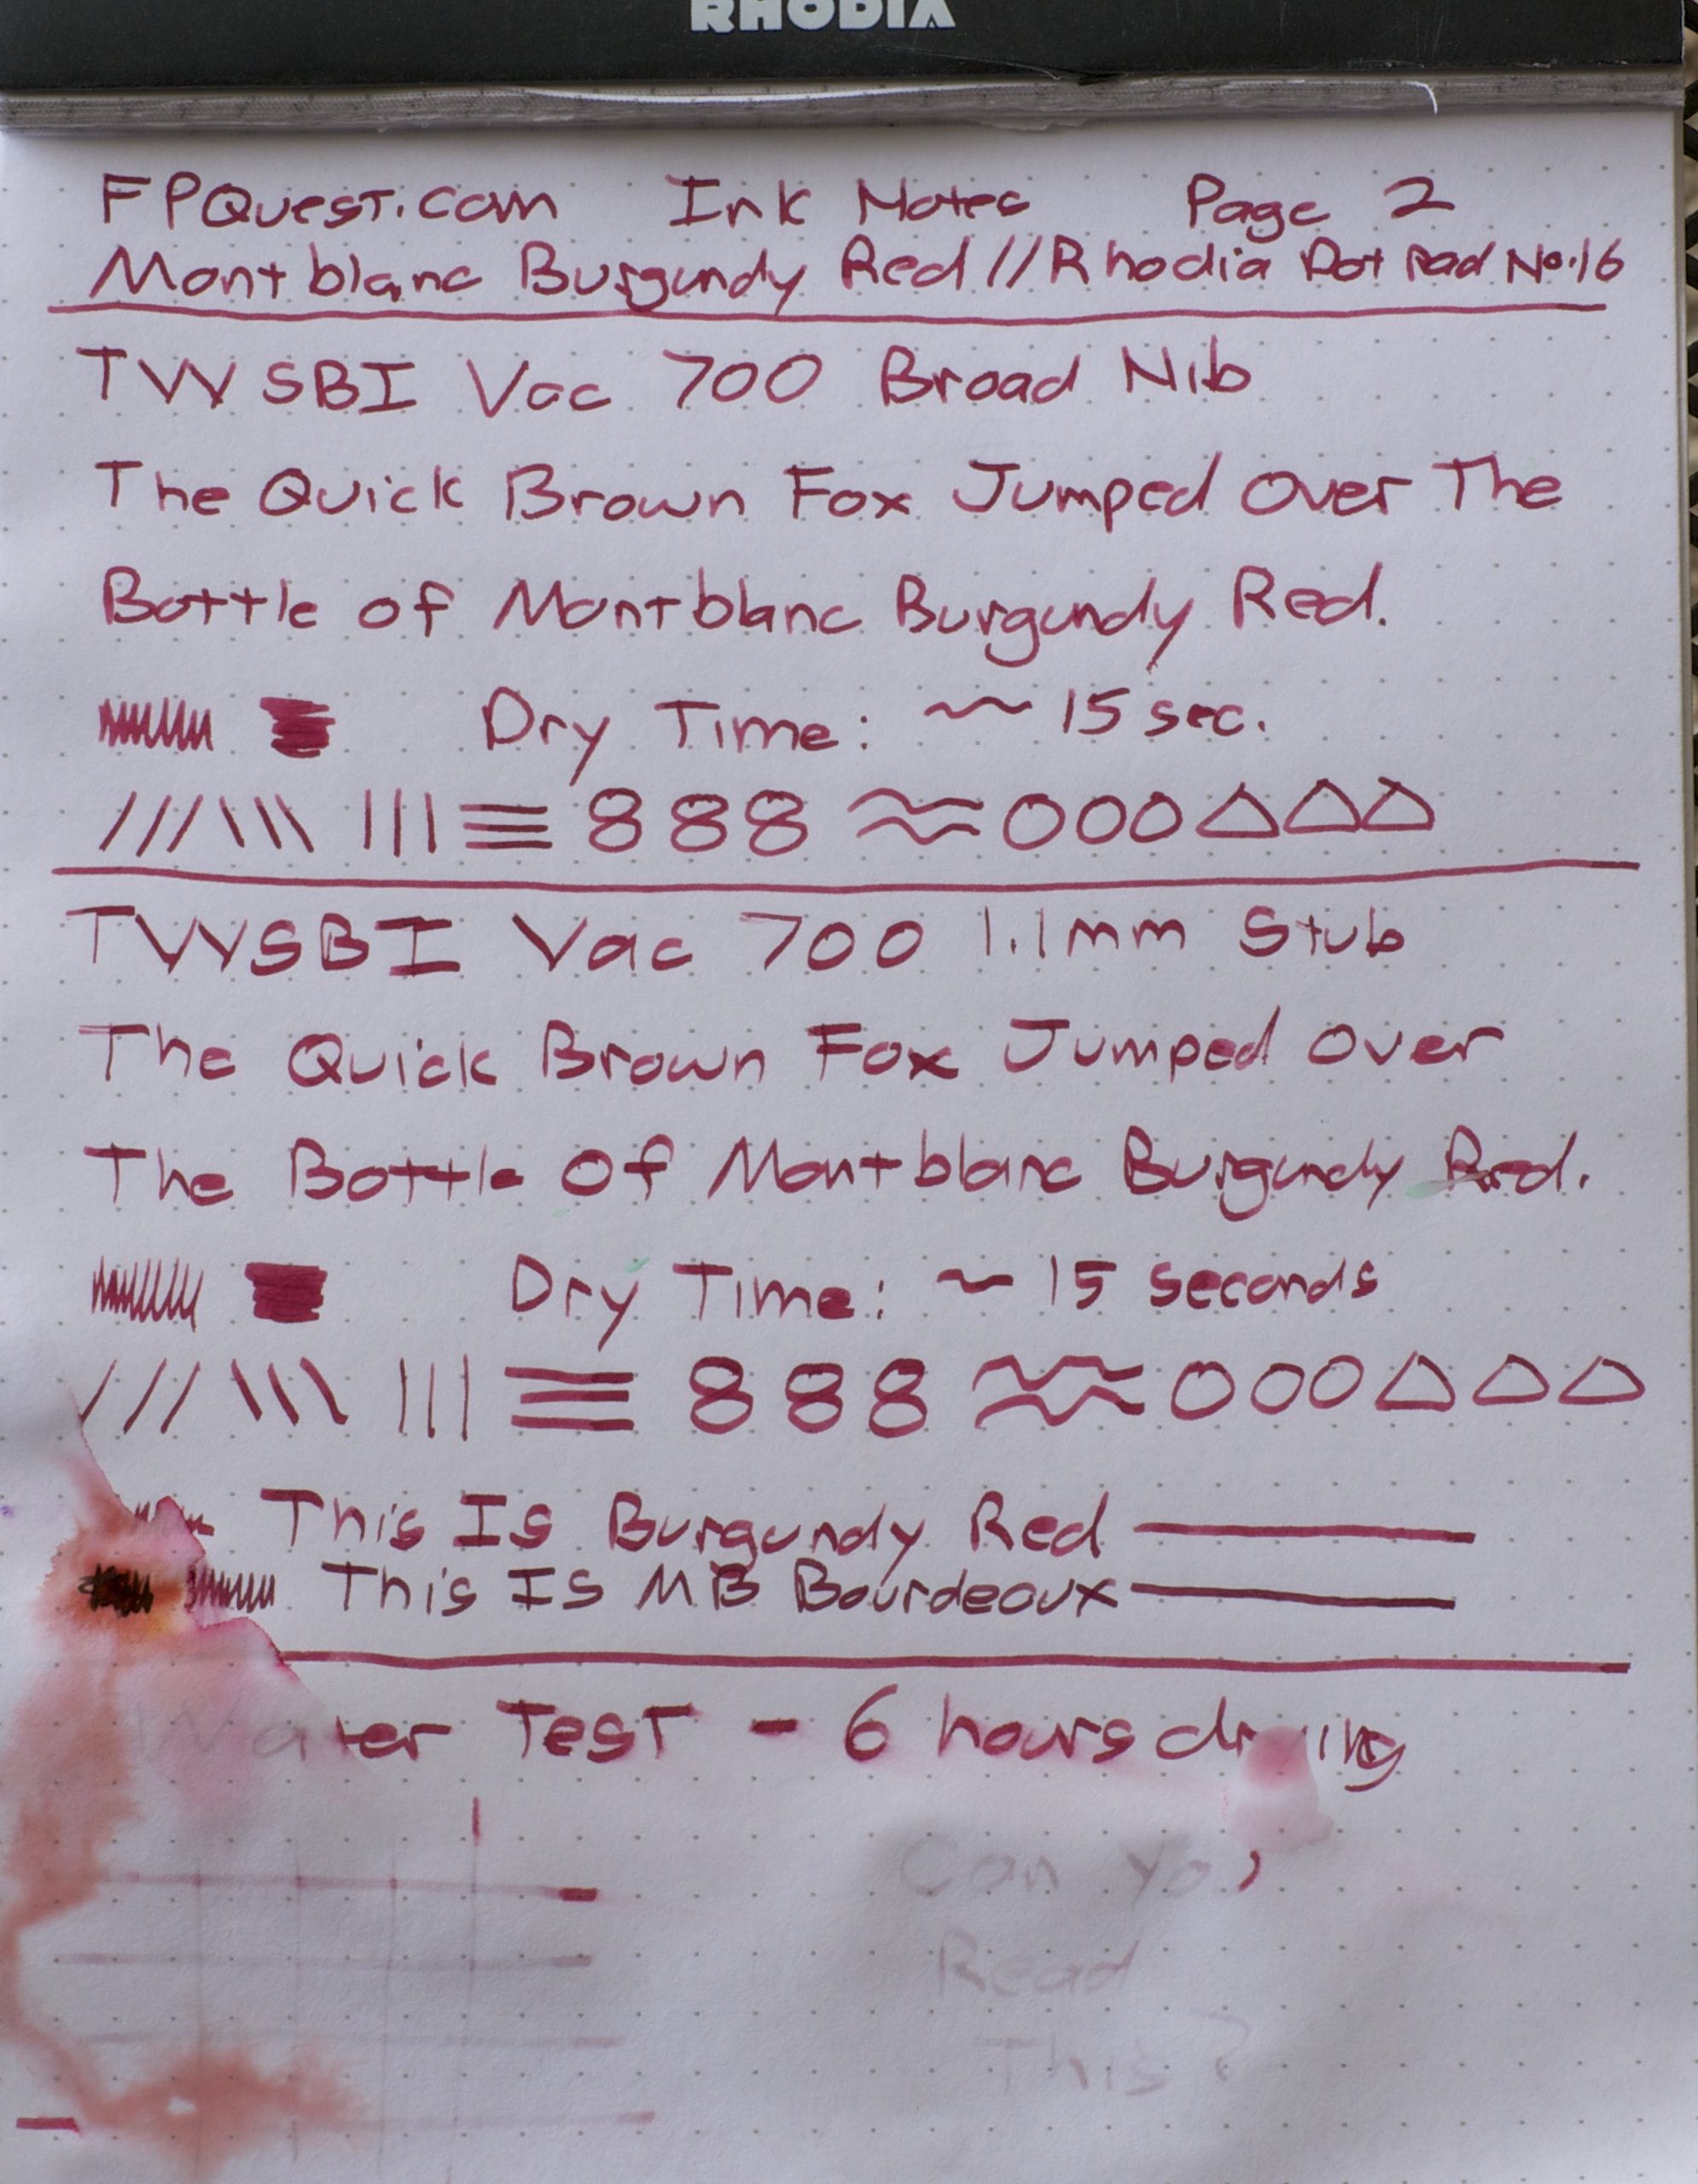 Montblanc Burgundy Red writing samples - page 2